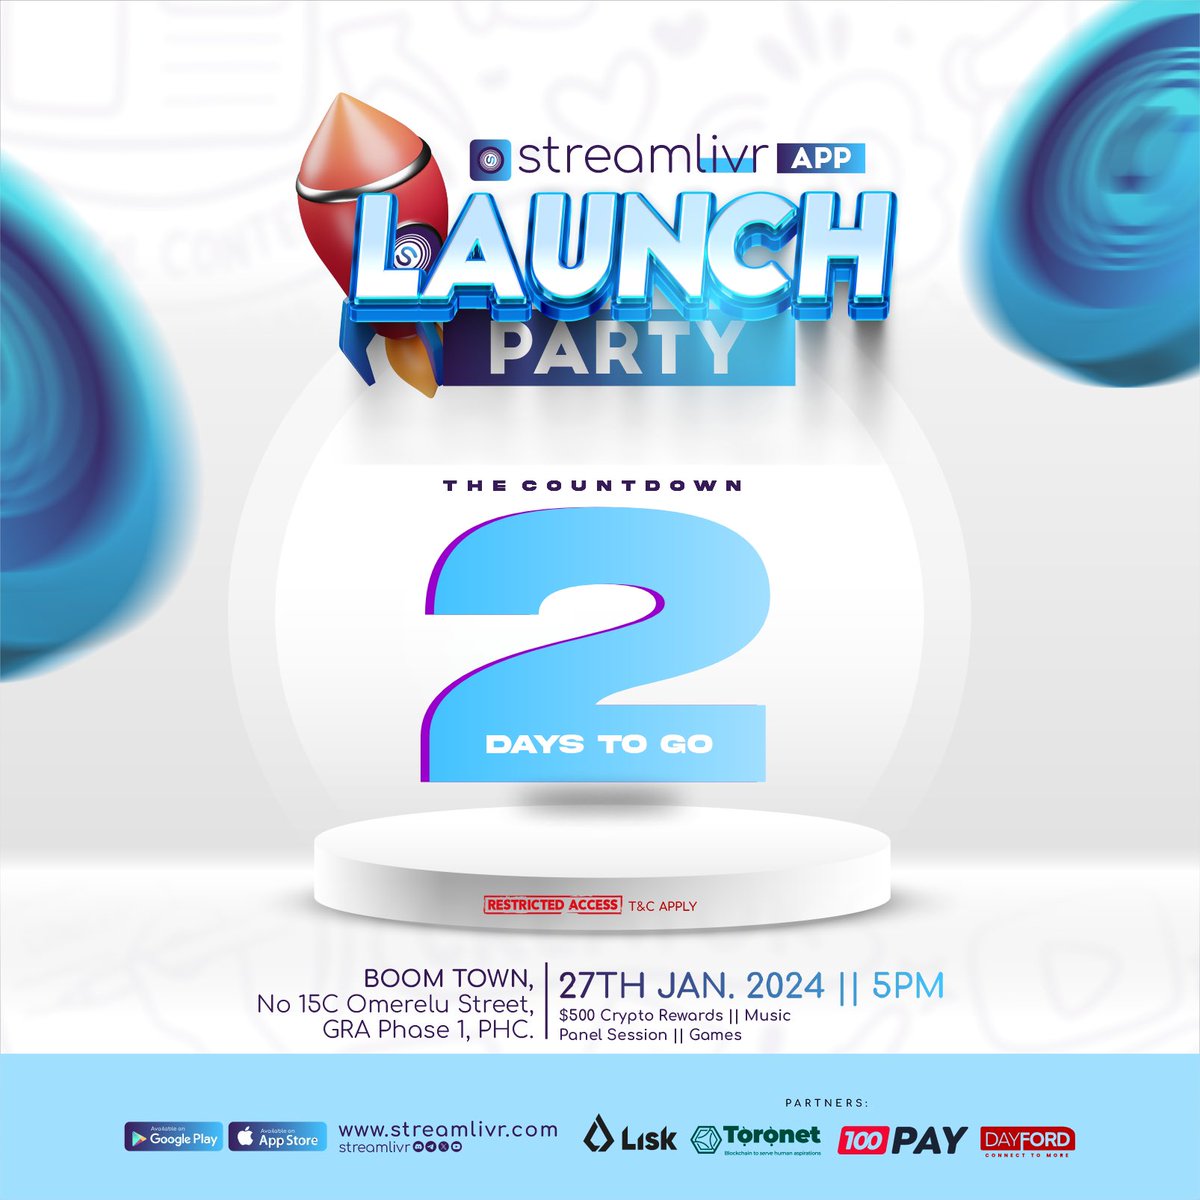 The Streamlivr Launch Party is just around the corner…

Get ready to go live in Style, you’ve got to be there🎉🚀

#streamlivrapp #streamlivrlaunchparty #streamlivrcommunity #livestreamingparty #applaunch